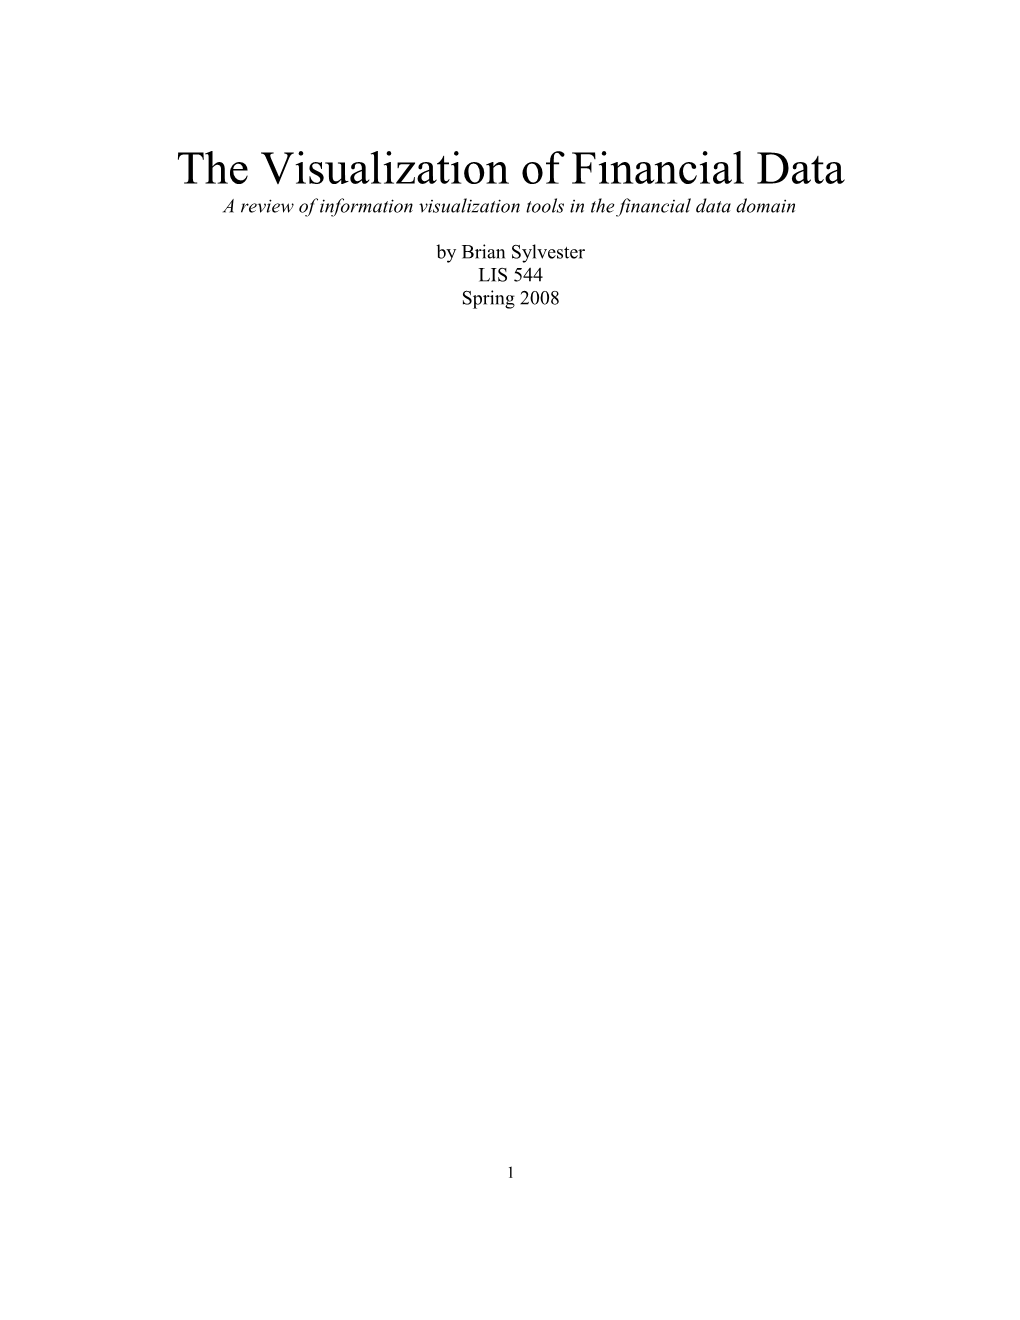 The Visualization of Financial Data